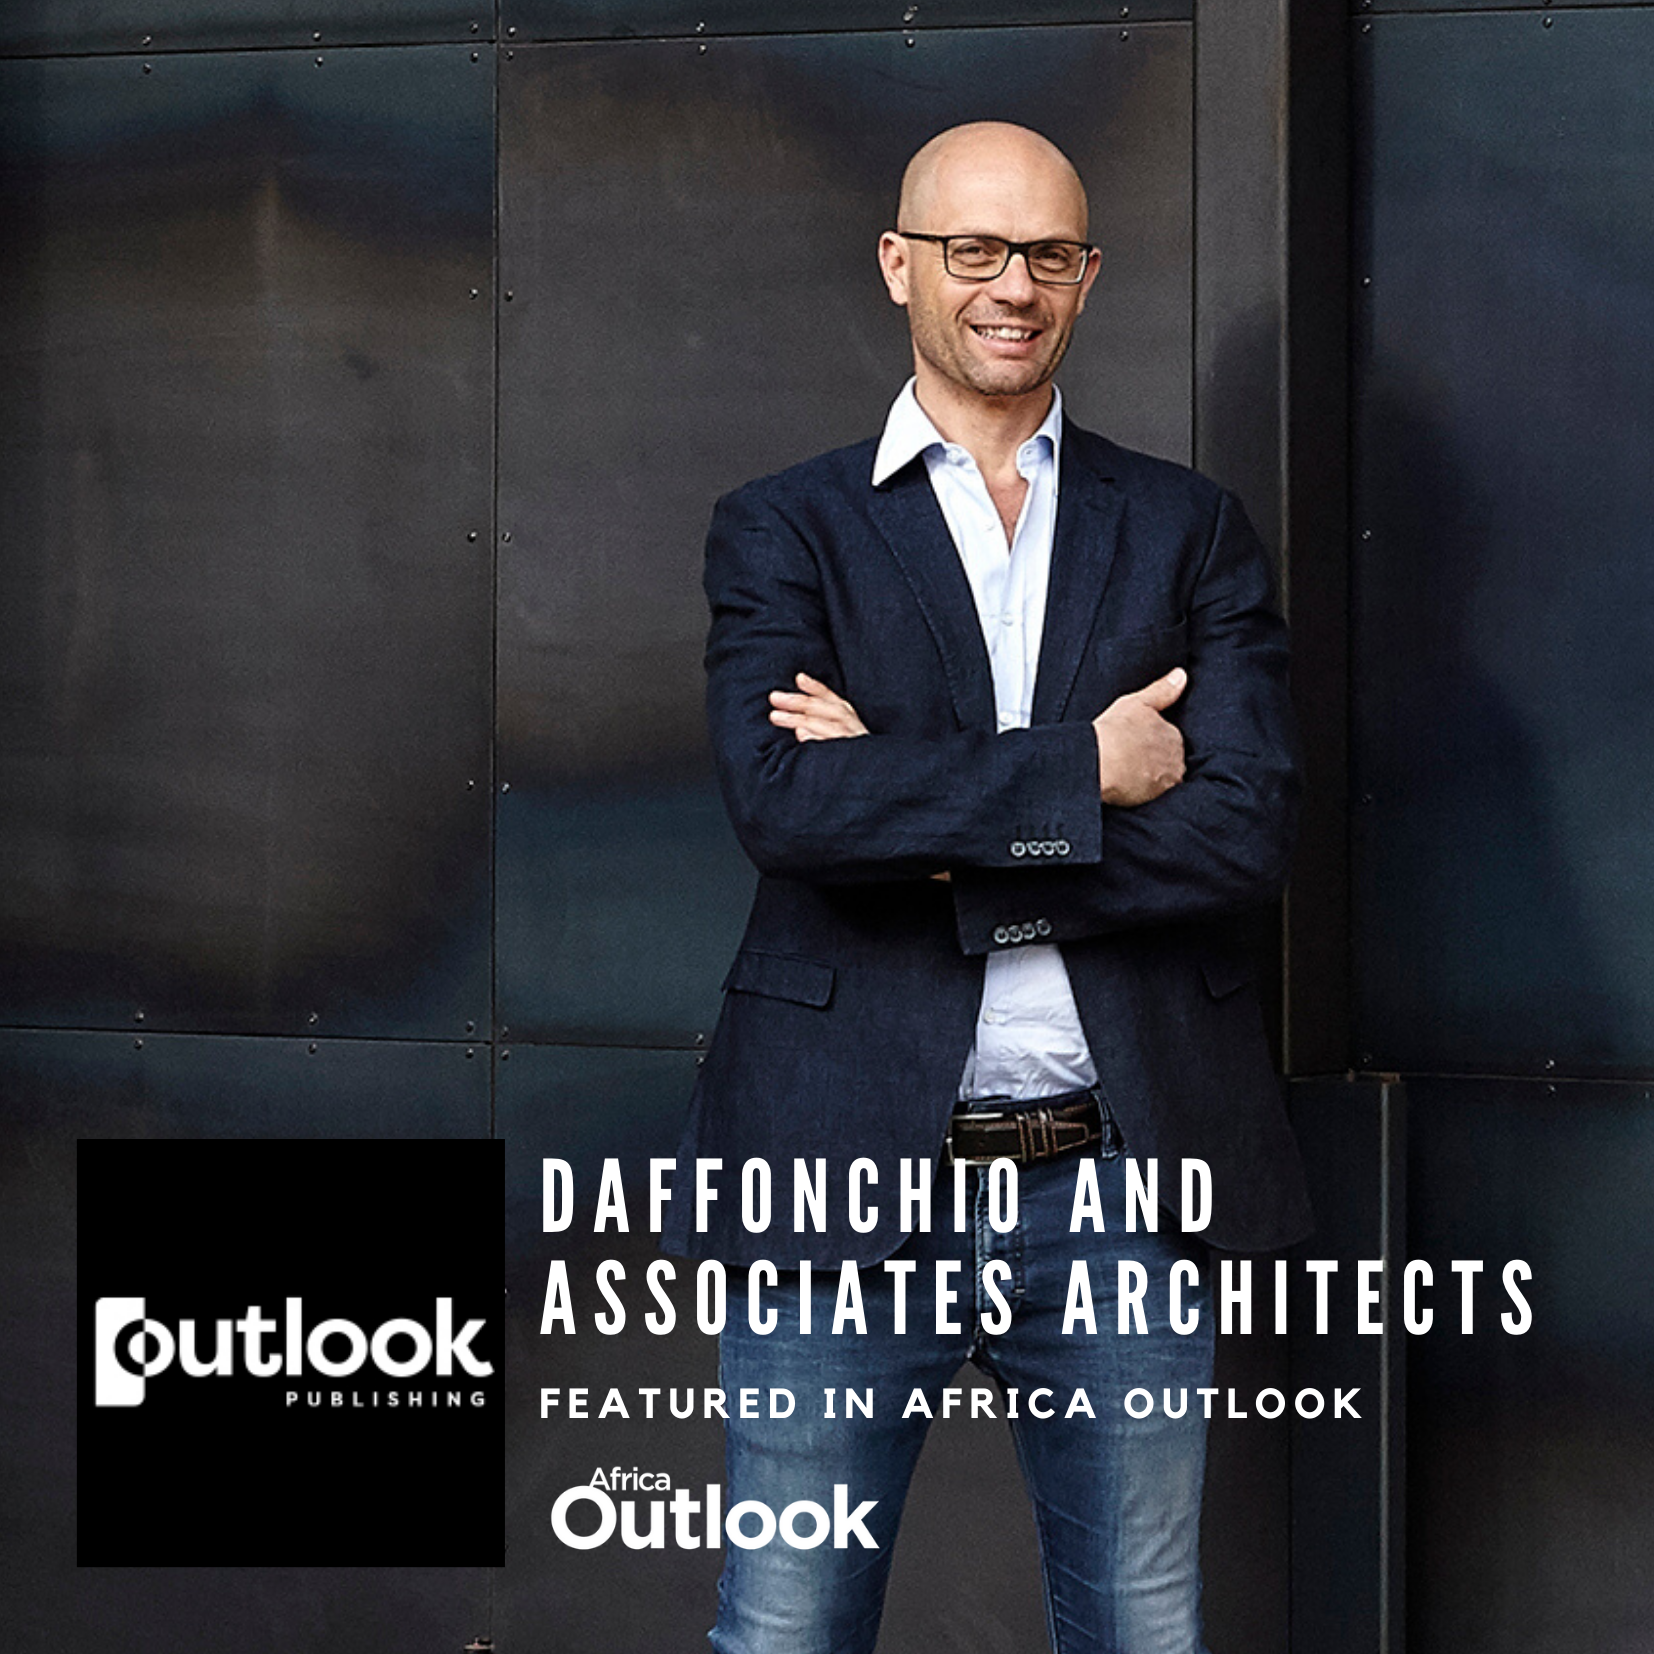 "The Qualitative Architect", Africa Outlook Magazine Feature 